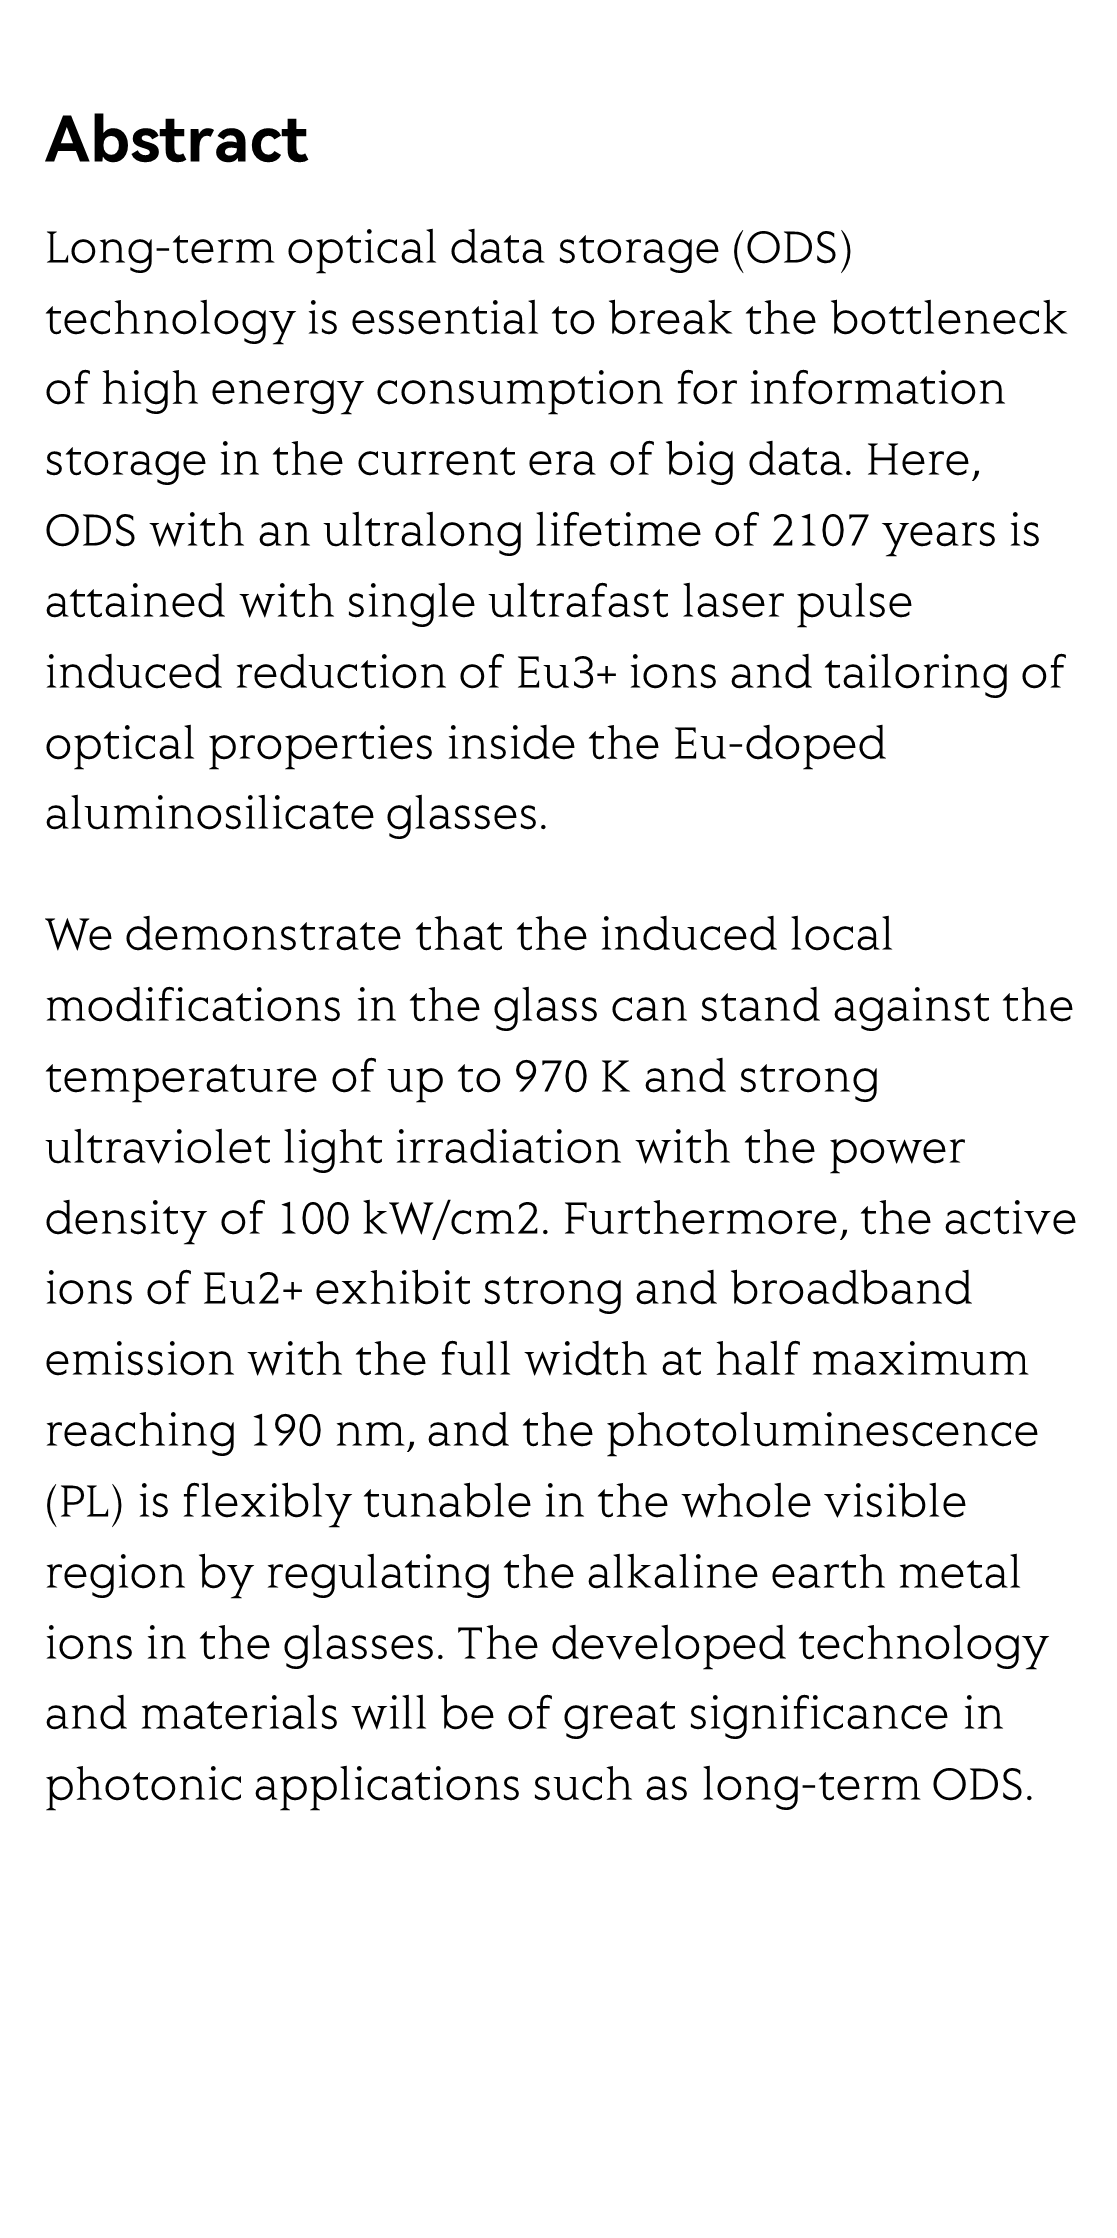 Ostensibly perpetual optical data storage in glass with ultra-high stability and tailored photoluminescence_2